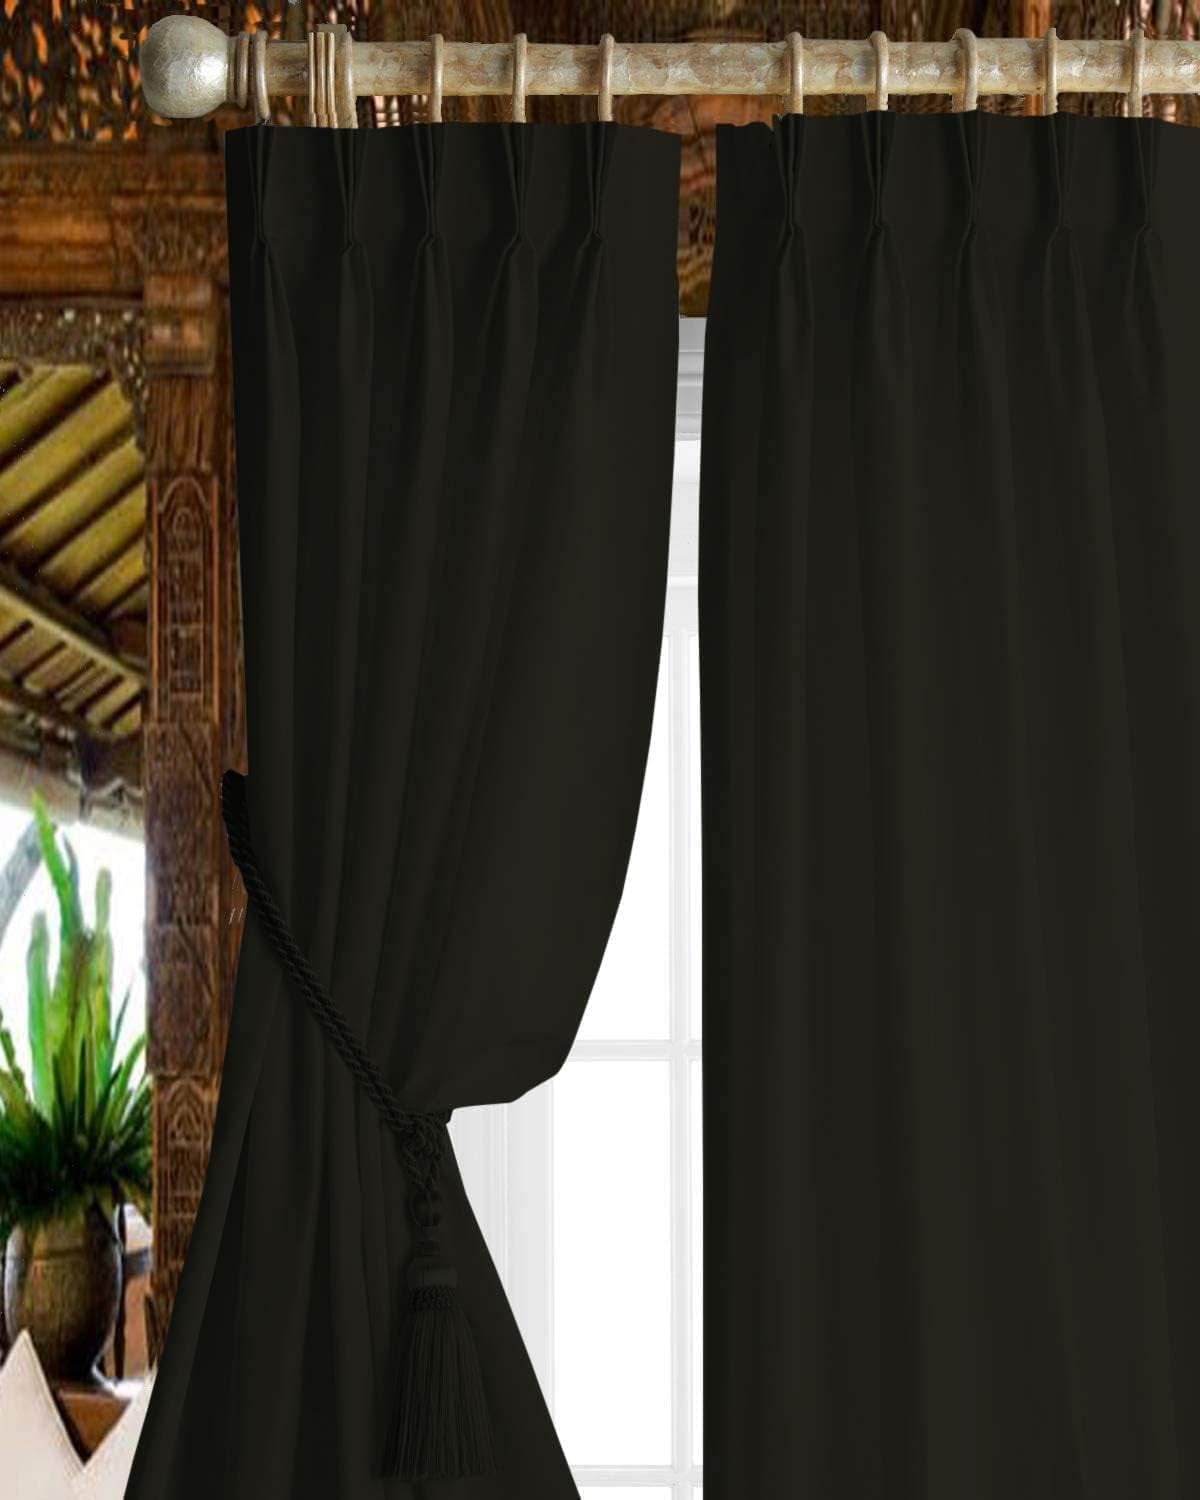 Magic Drapes Pinch Pleated Curtains Triple Pinch Pleat Drapes with Tiebacks & Hooks Blackout Thermal Room Darkening Window Curtains for Living Room, Bedroom, Hall W(26"+26") L45 (2 Panels, Royal Blue)  Magic Drapes Solid - Black 52"X 120" 